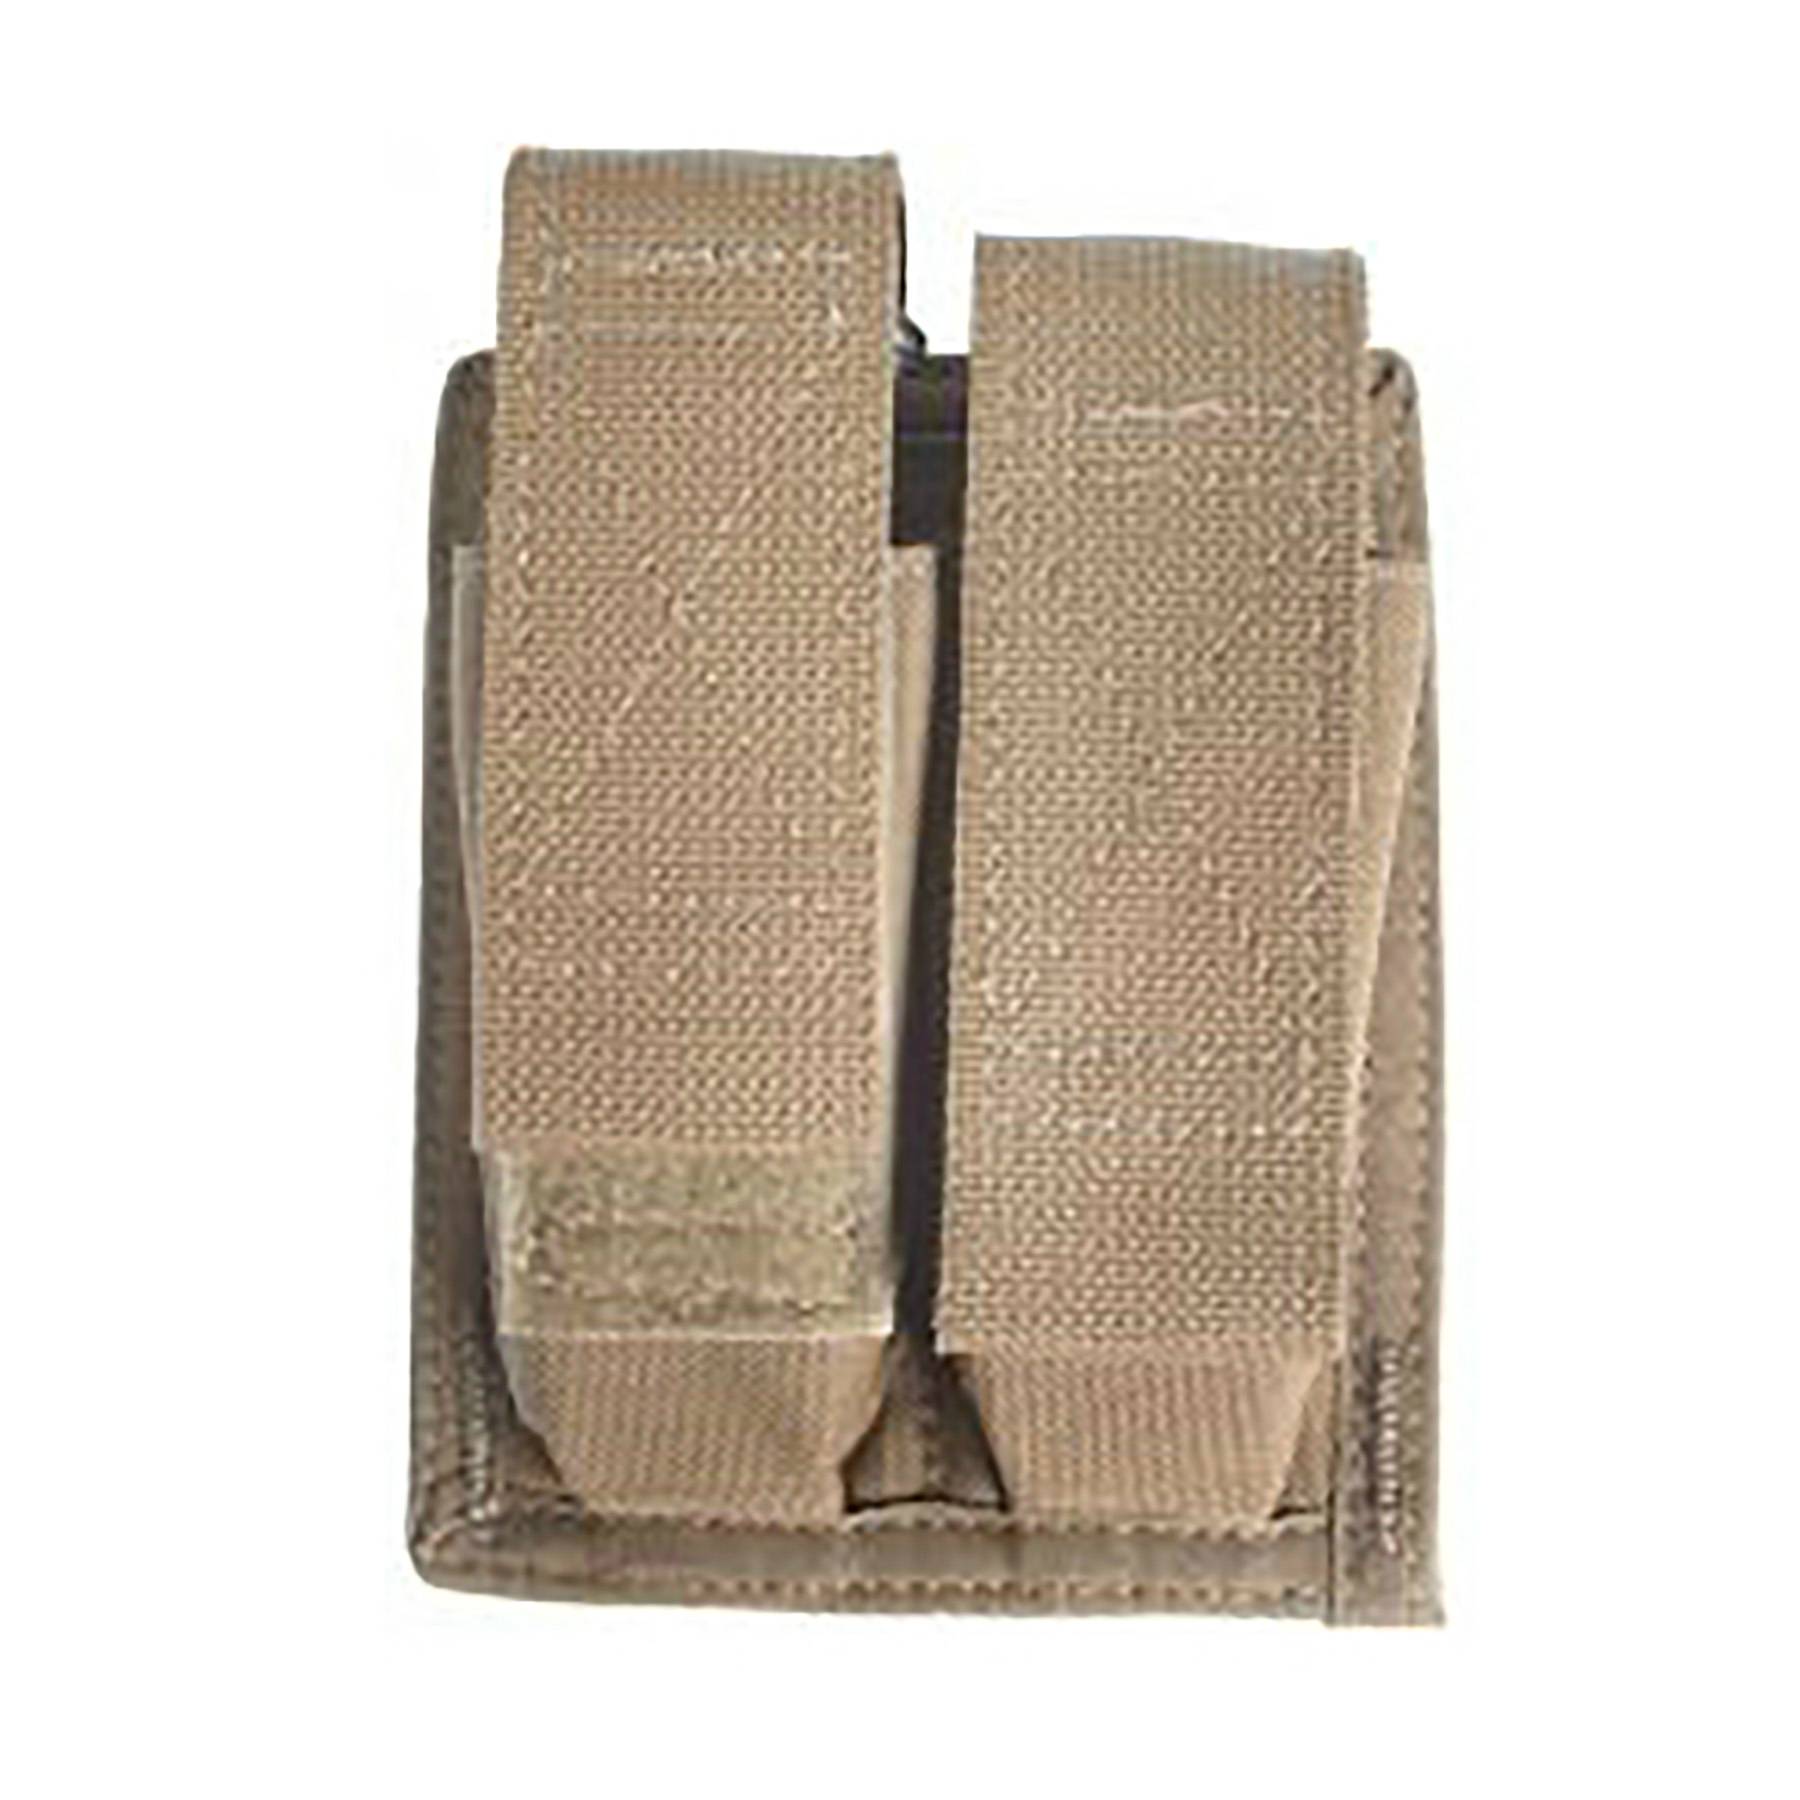 Spec-Ops Double M-9 Mag Utility Pouch